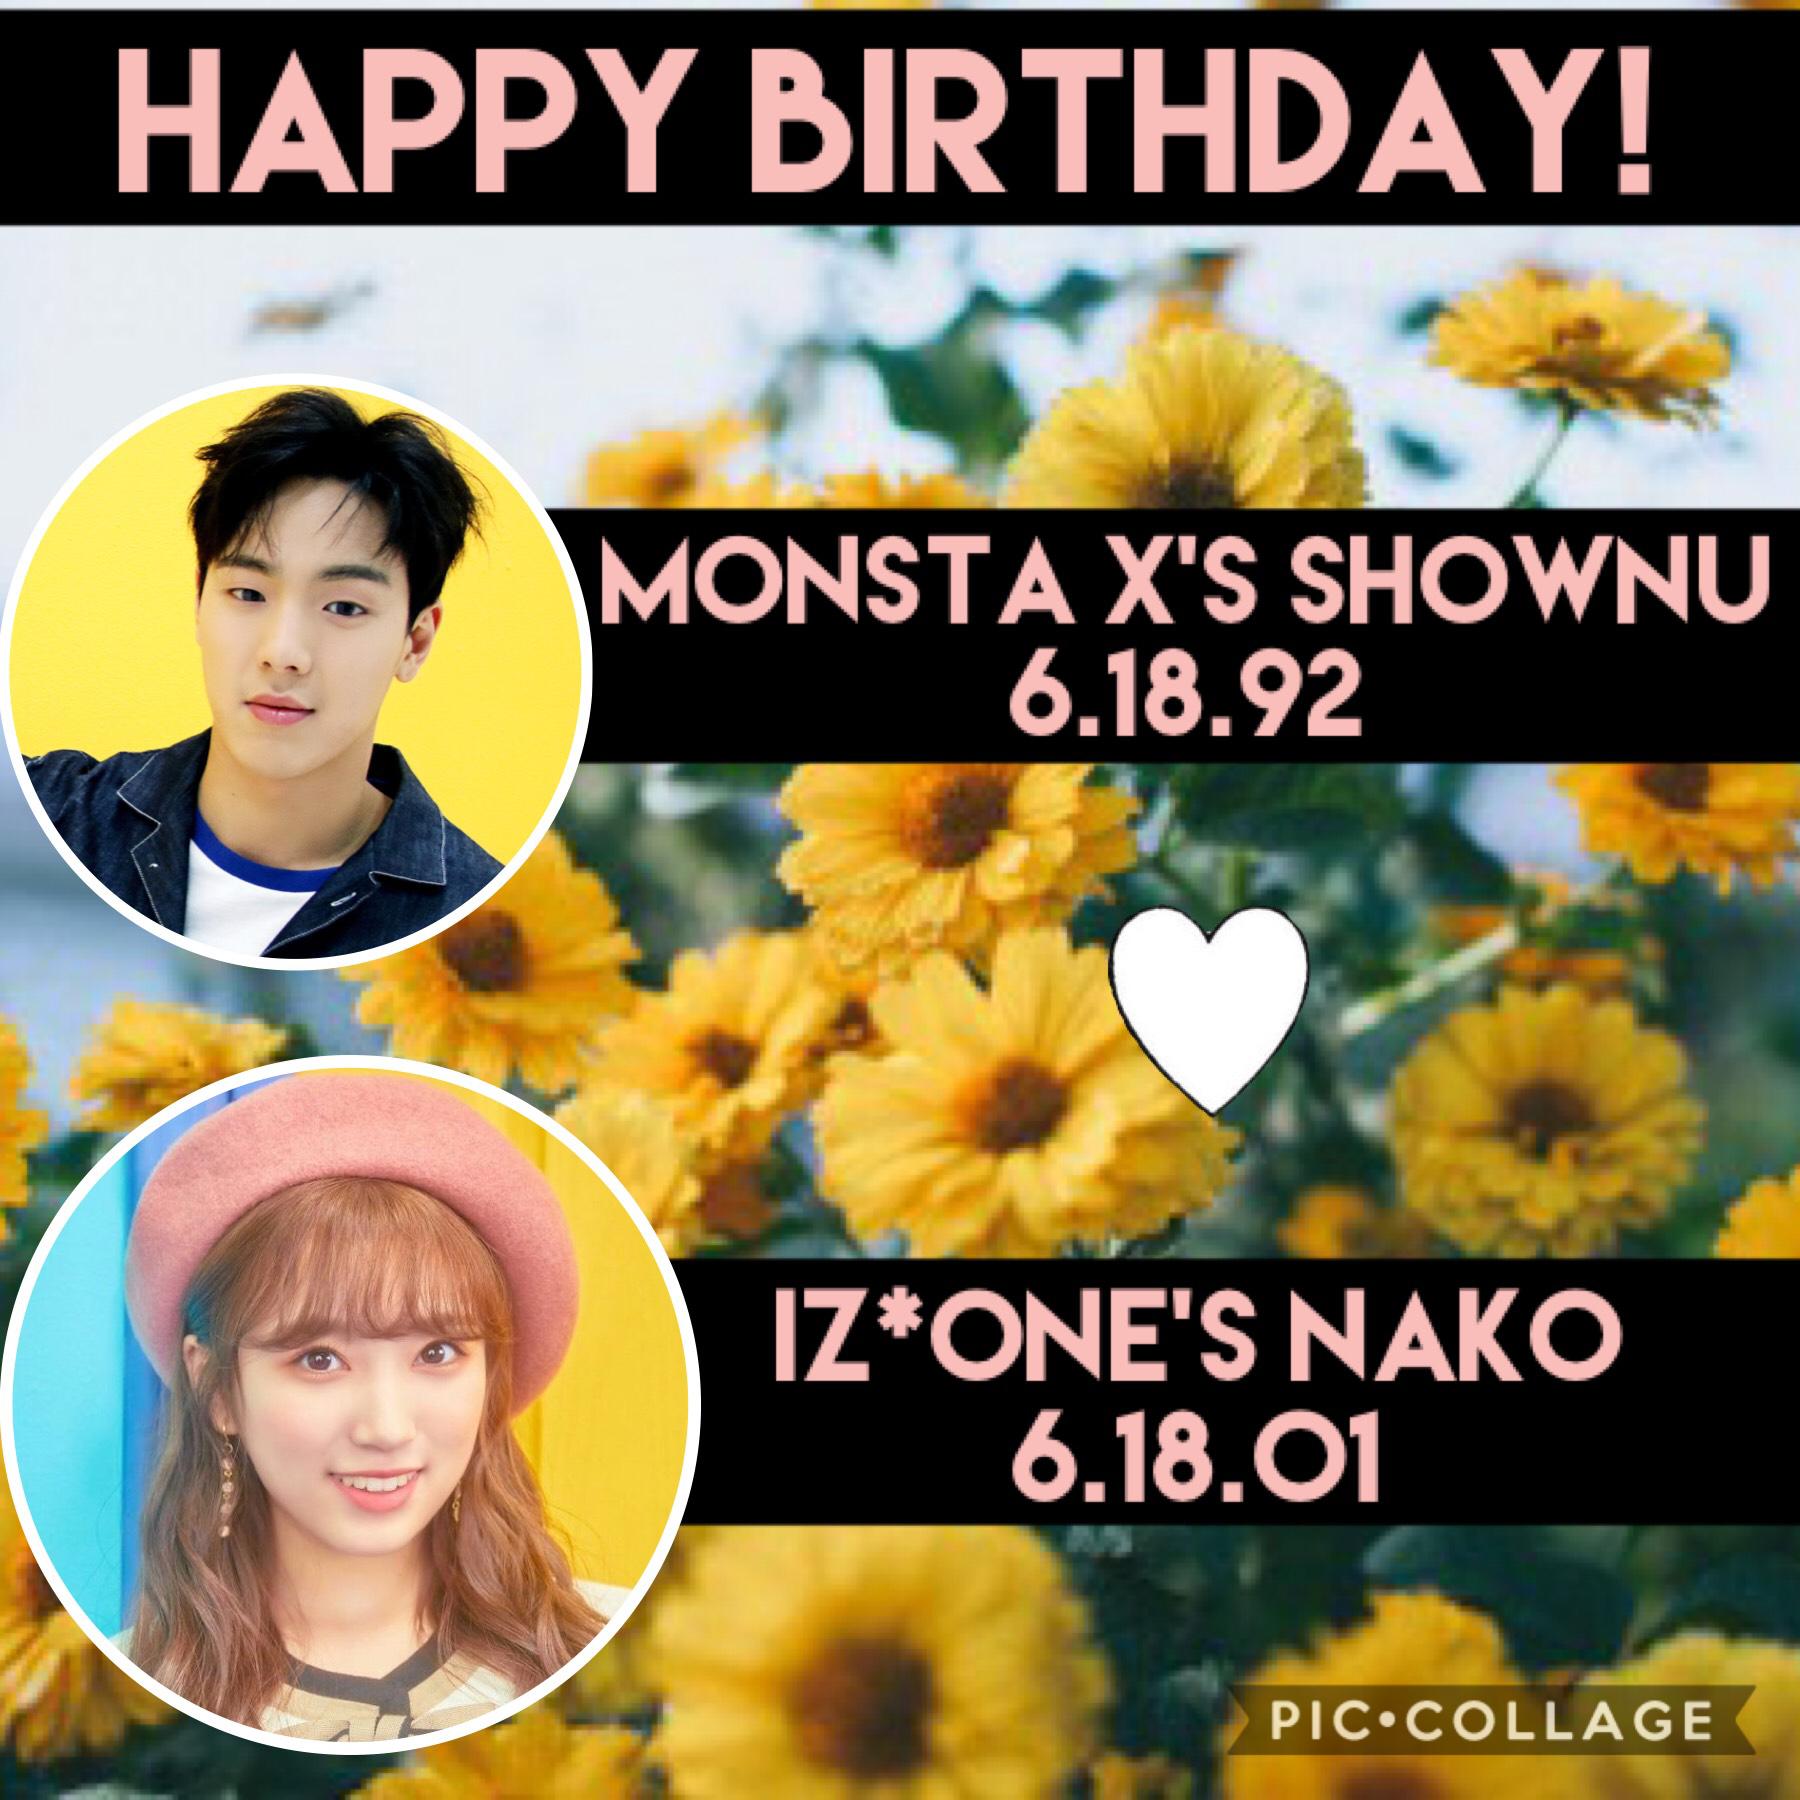 •🎉🎈•
Happy birthday!! Uwu Nako is only 4’11! Also there was this one guy at my school who was a grade ahead of me and he looked exactly liked Shownu so every time I saw him I would freak out lol☺️
Other birthdays:
•Oh My Girl’s Arin~ Today
•AOA’s Chanmi~J